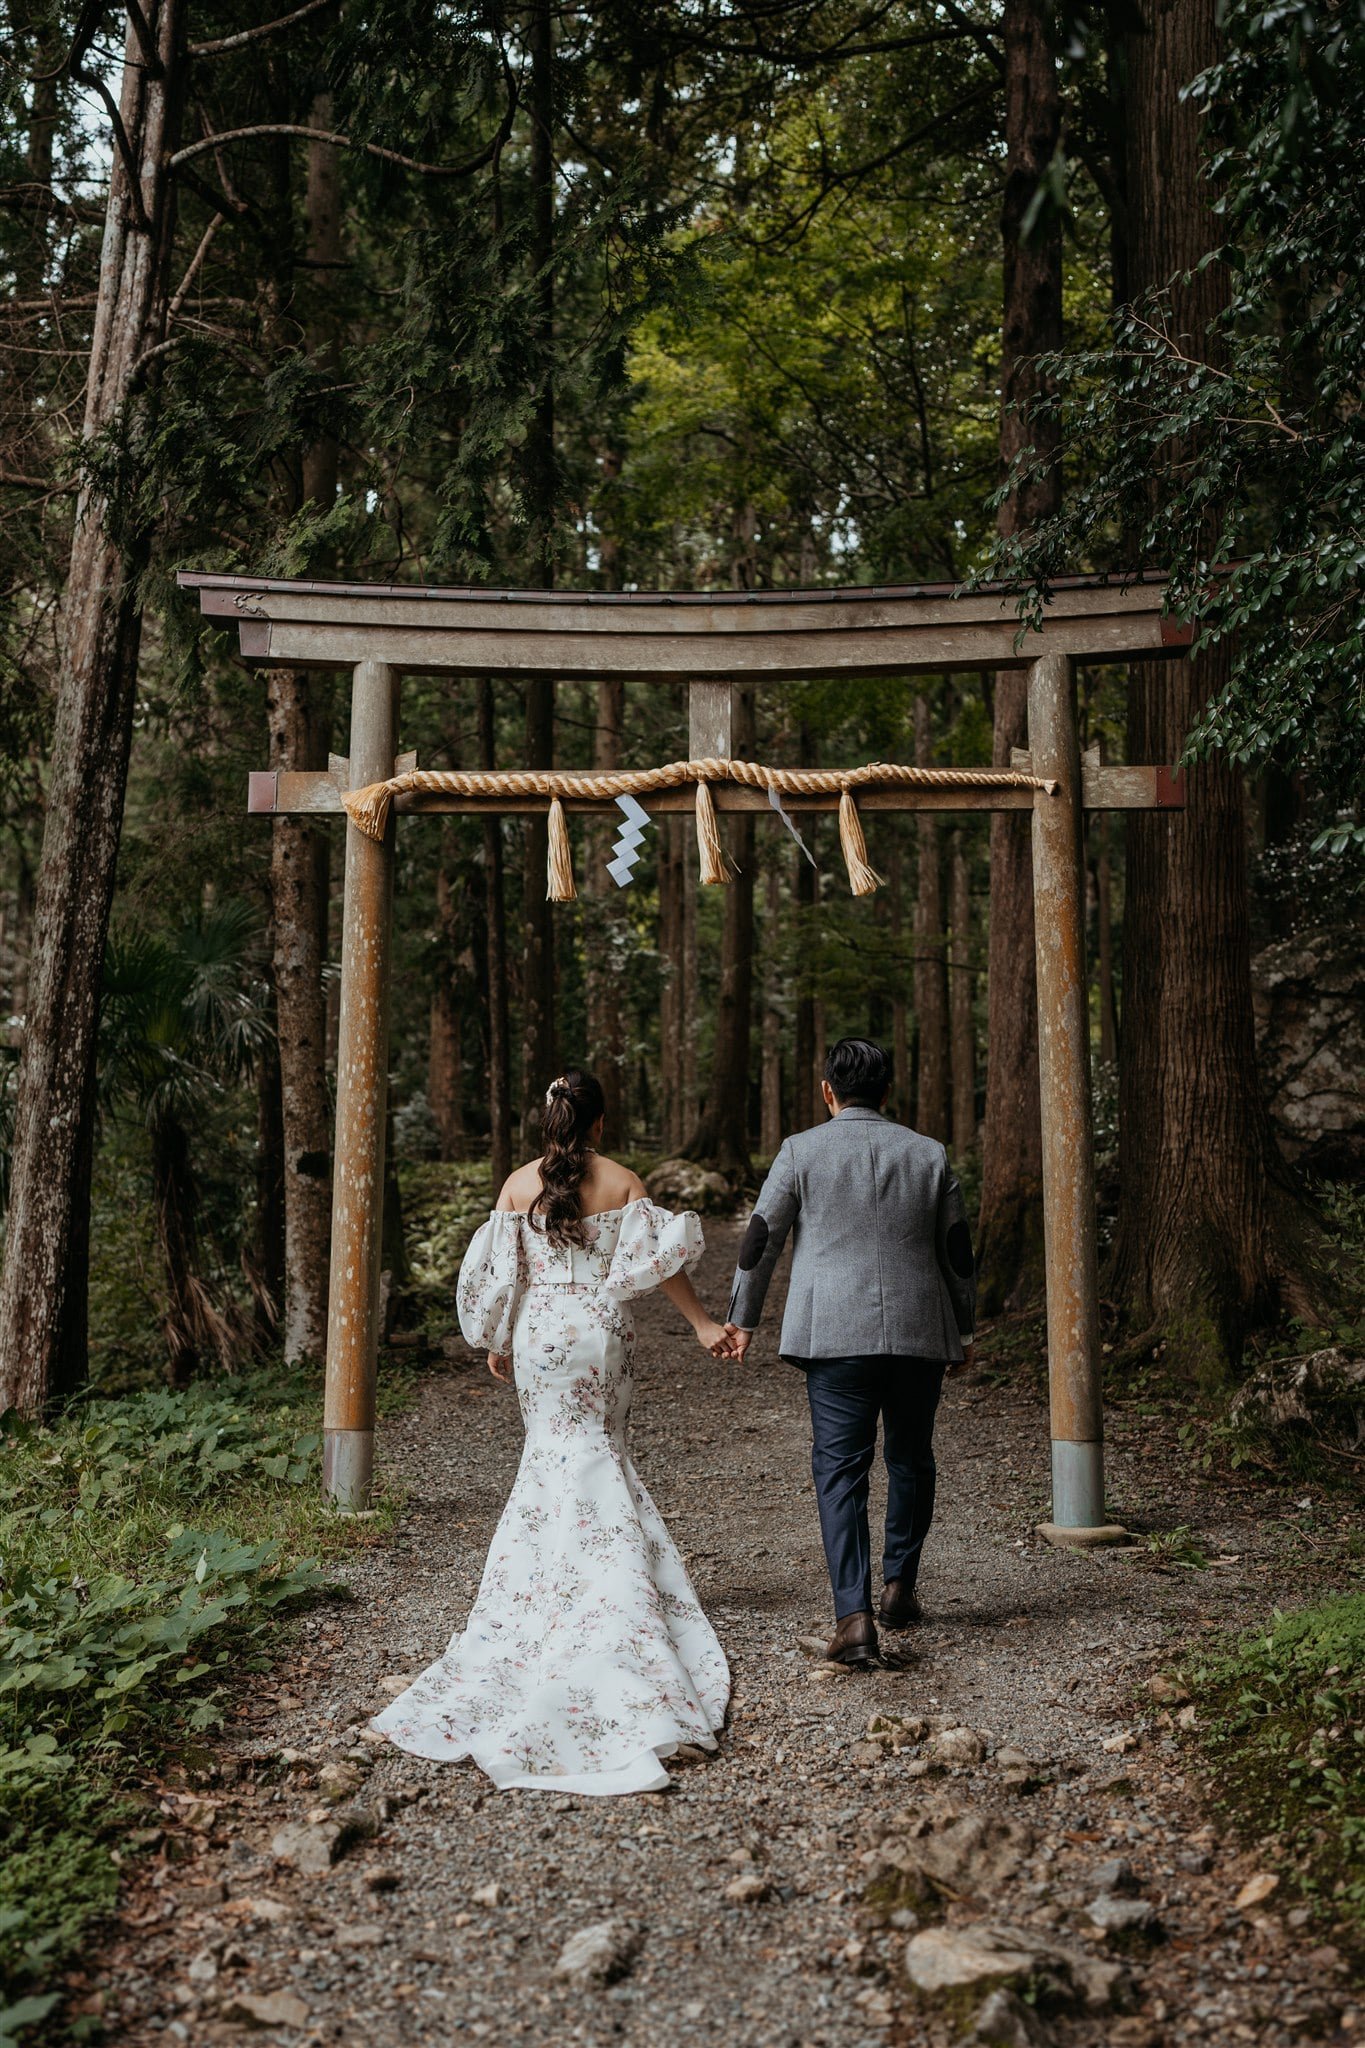 Bride and groom holding hands, walking into the forest during their elopement in Japan